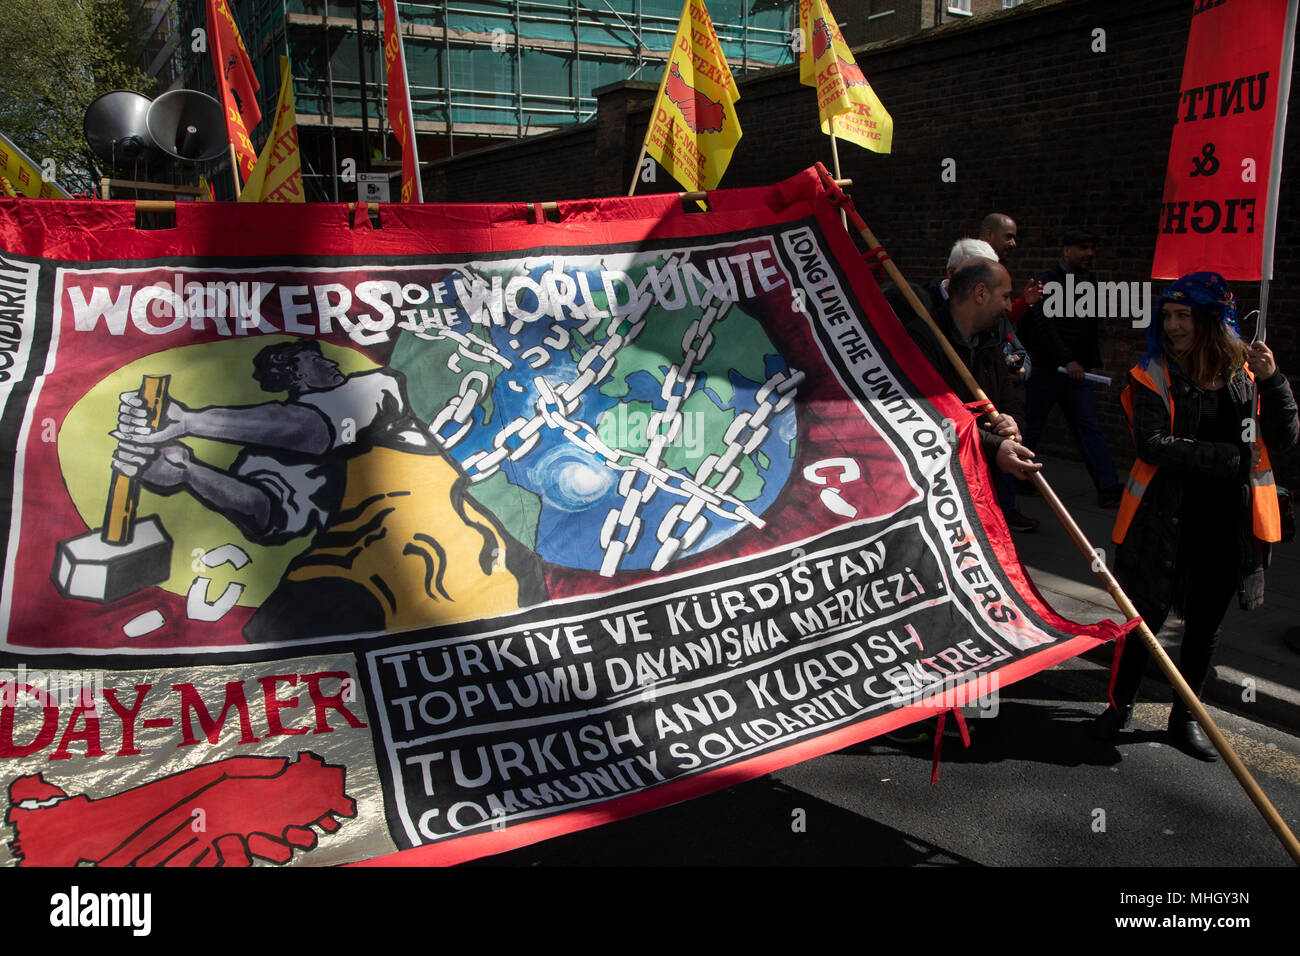 London, UK. 1st May, 2018. May Day celebrations in London, England, United Kingdom. Demonstration by unions and other organisations of workers to mark the annual May Day or Labour Day. Groups from all nationalities from around the World, living in London gathered to march to a rally in central London to mark the global workers day. Credit: Michael Kemp/Alamy Live News Stock Photo